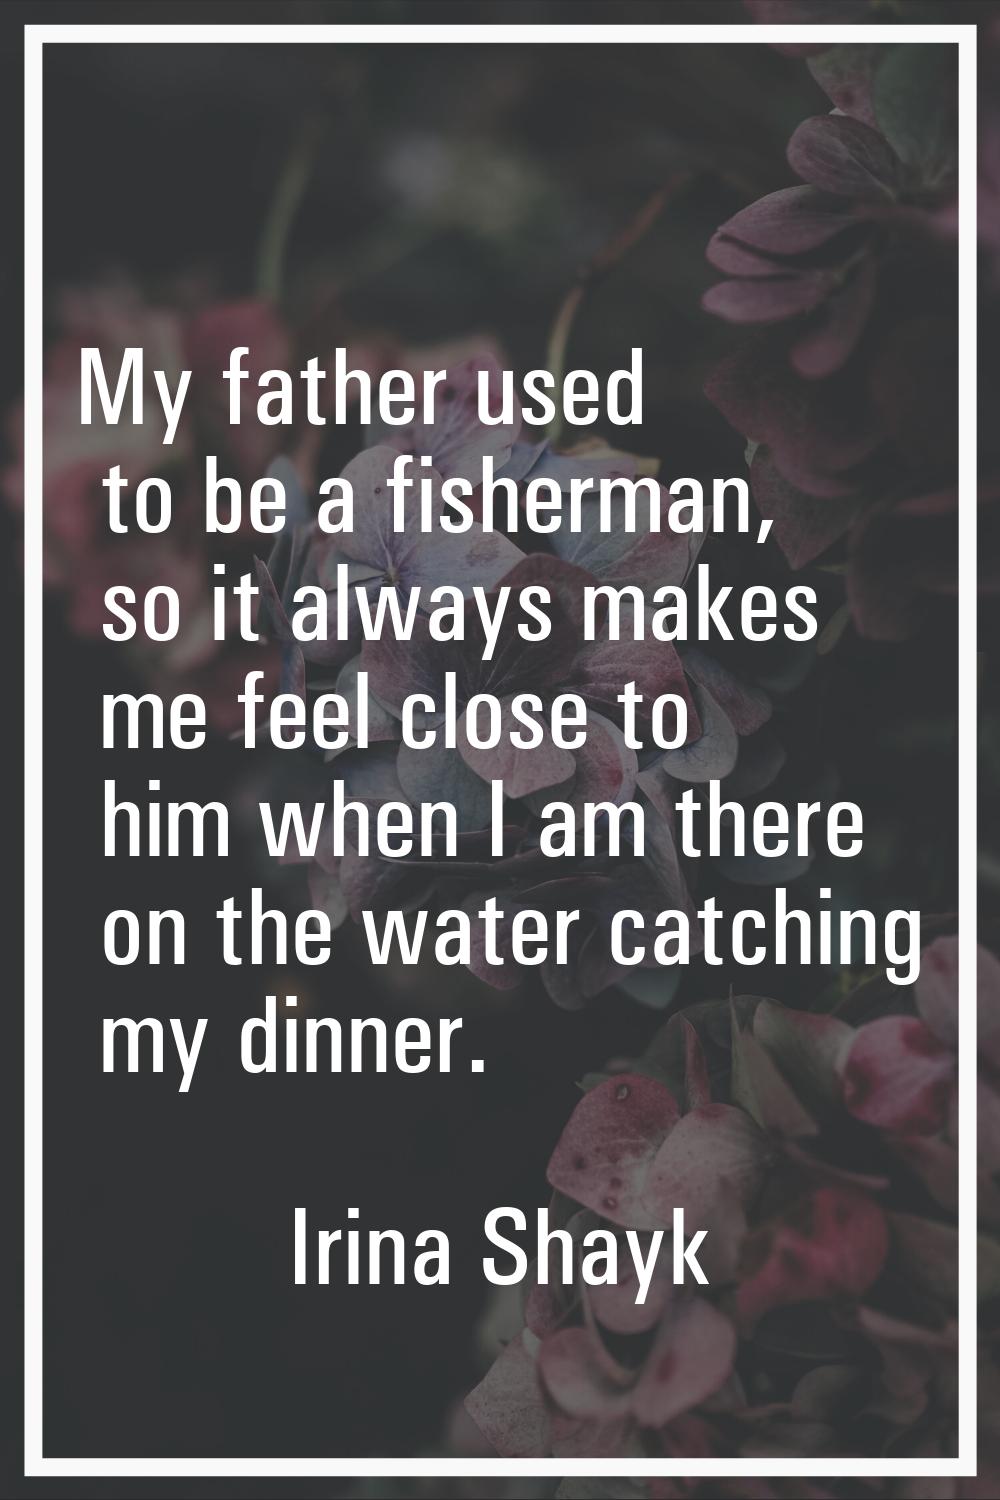 My father used to be a fisherman, so it always makes me feel close to him when I am there on the wa